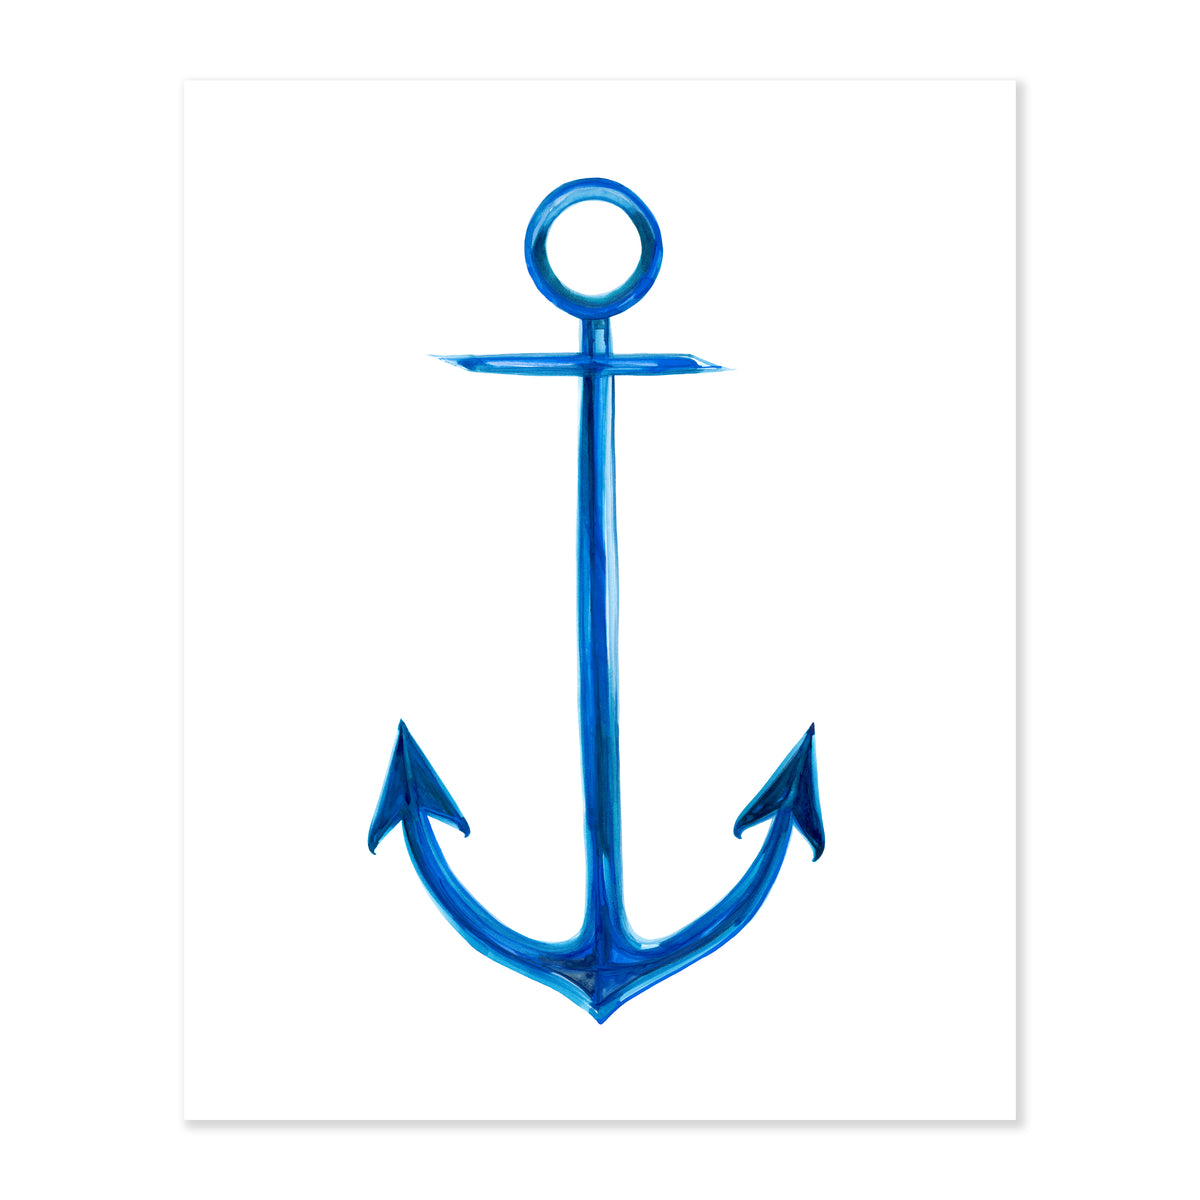 a fine art print illustrating a ship anchor with blue and navy watercolors on a soft white background